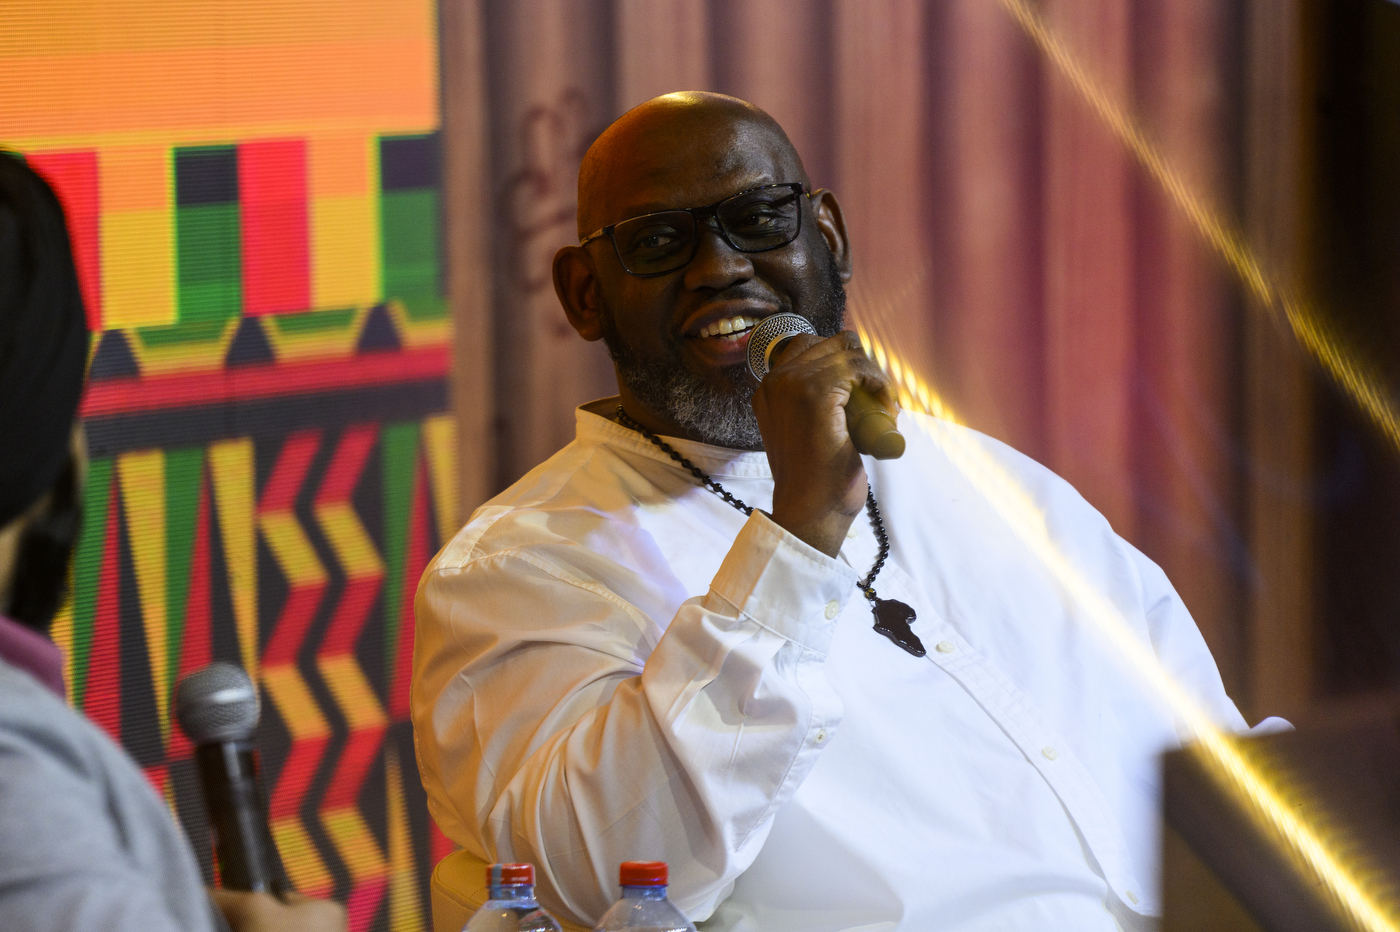 African Music has Exploded Globally, Says Universal Music CEO